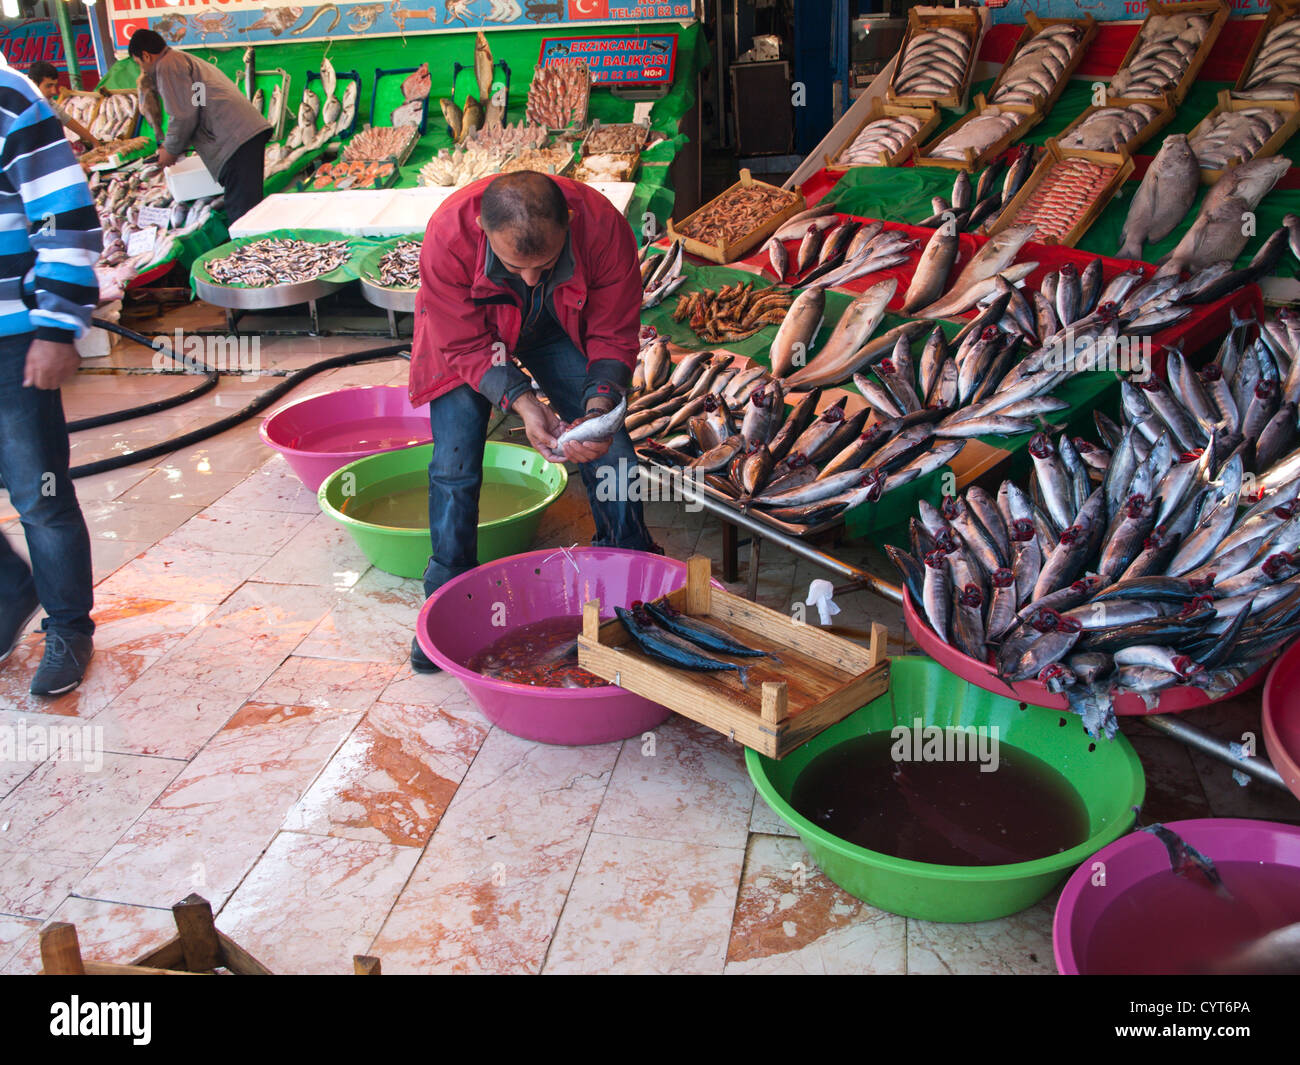 Morning fish market in Kumkapi Istanbul Turkey, fish fresh straight off the boats, cleaning fish for the display Stock Photo